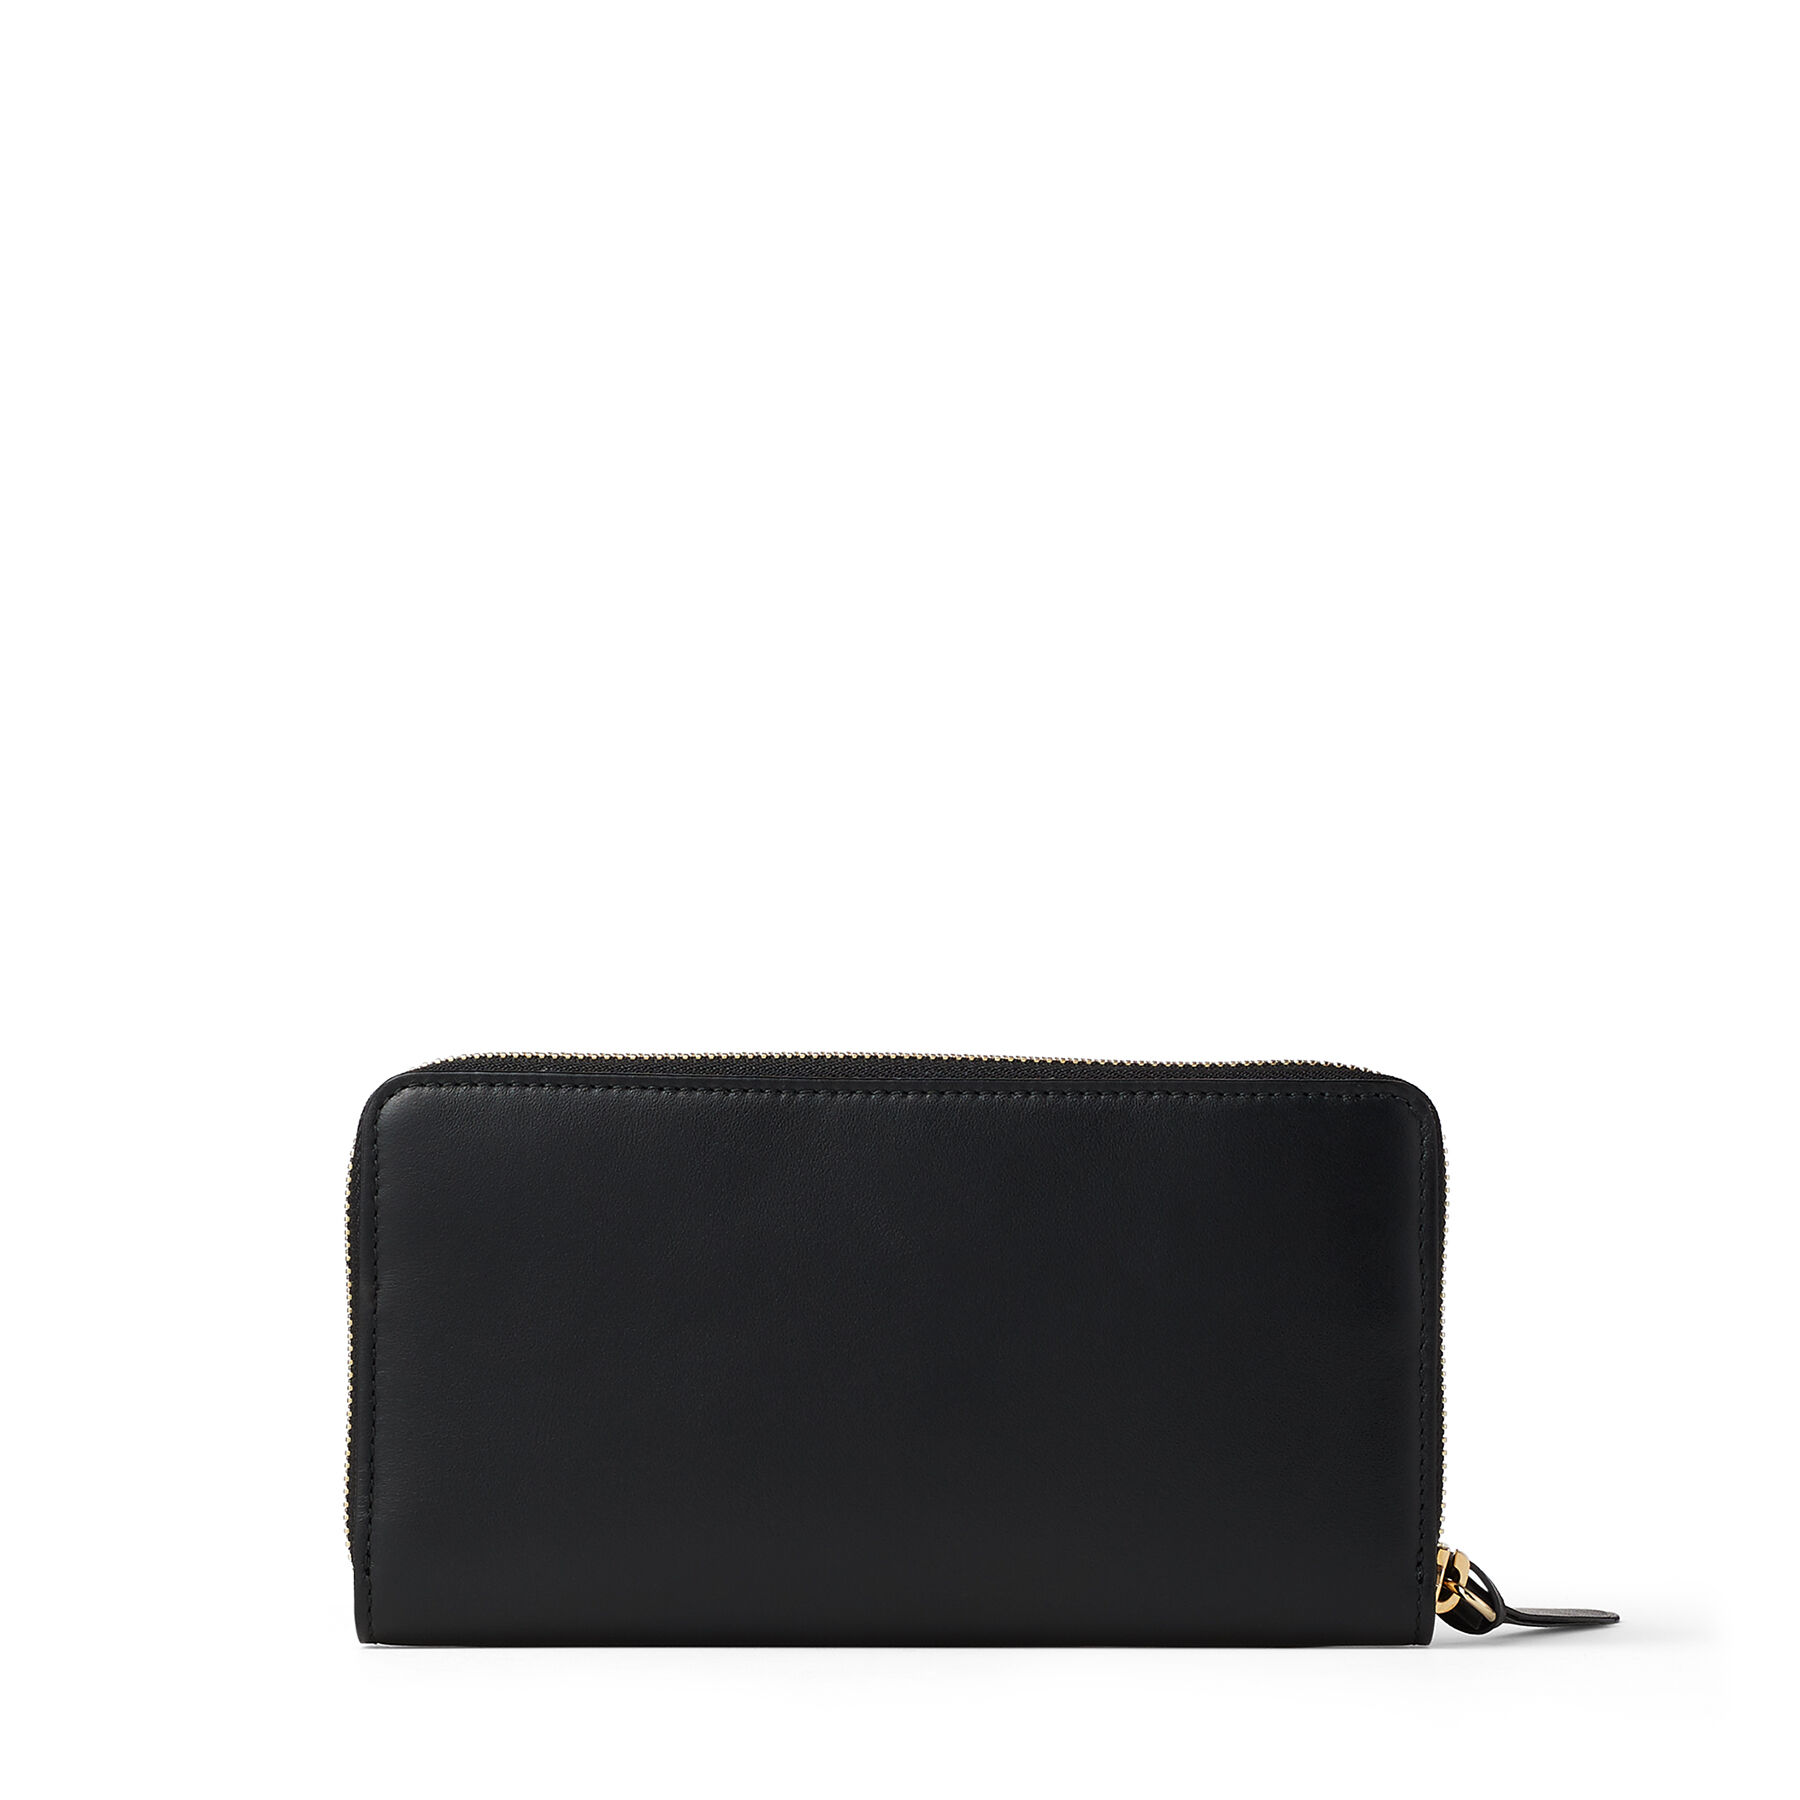 Black Smooth Calf Leather Wallet with JC Emblem |PIPPA |Cruise '20 ...